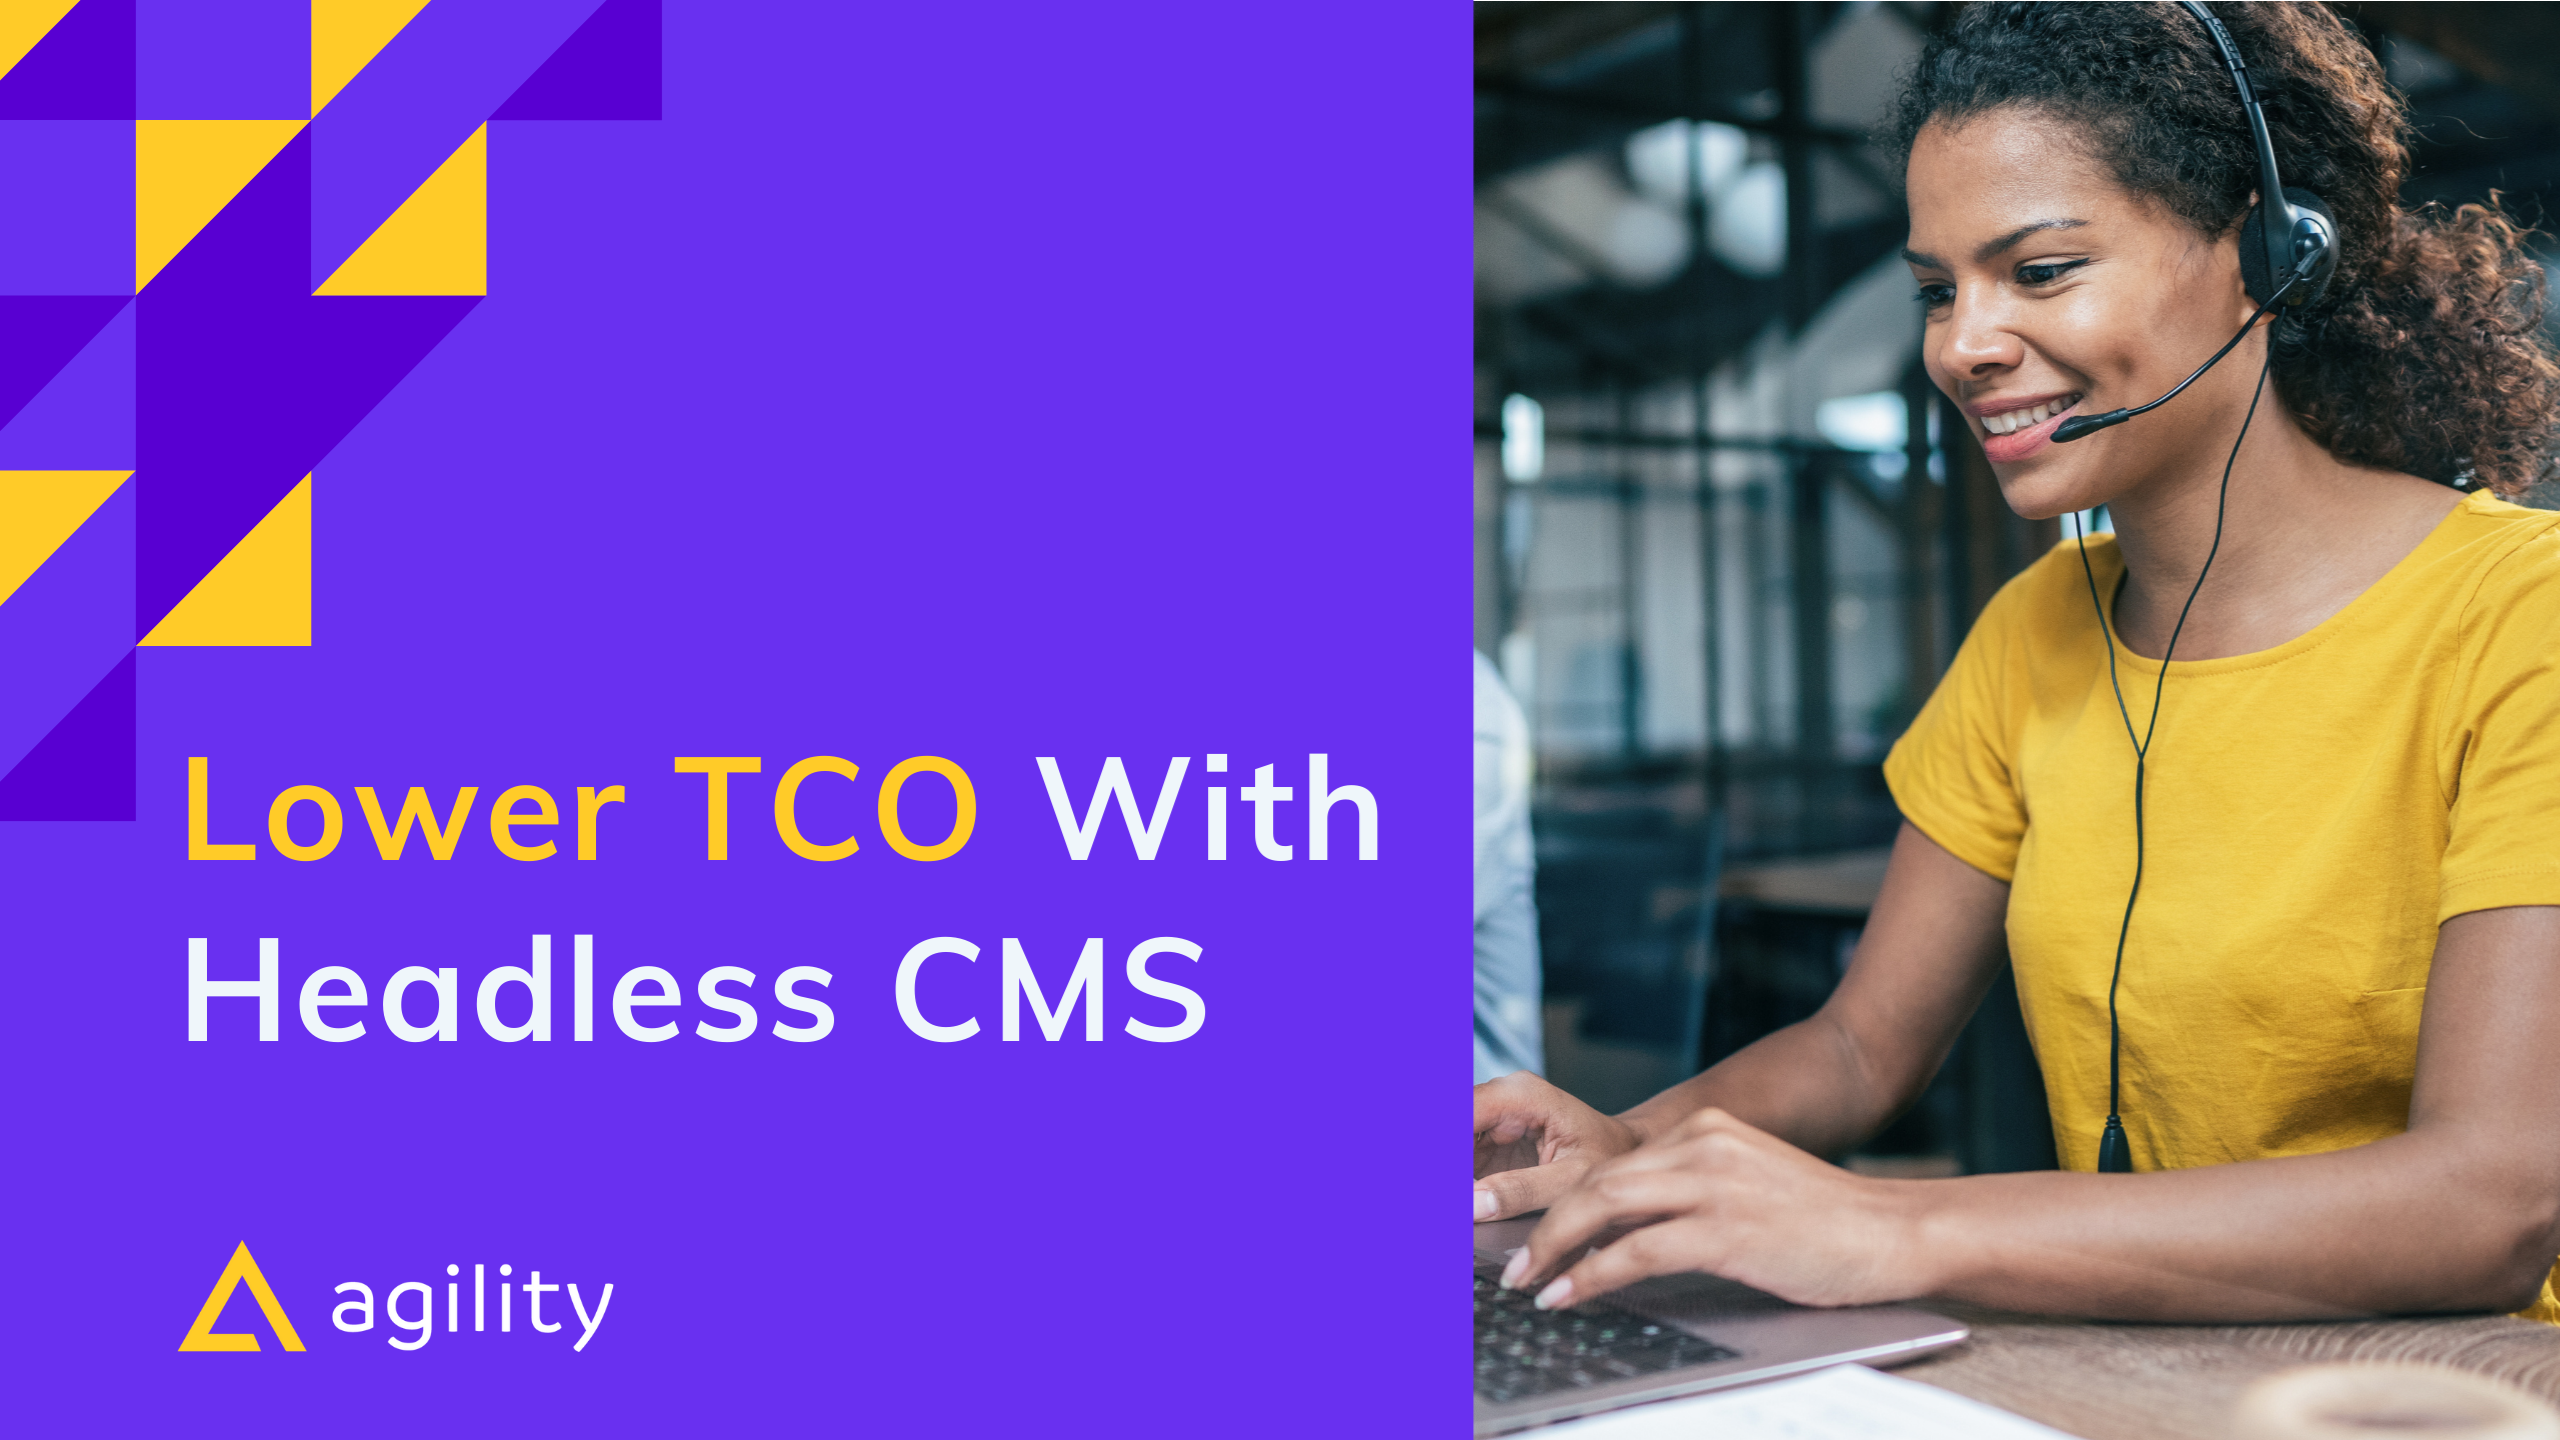  Headless CMS With White-glove Service Lowers TCO